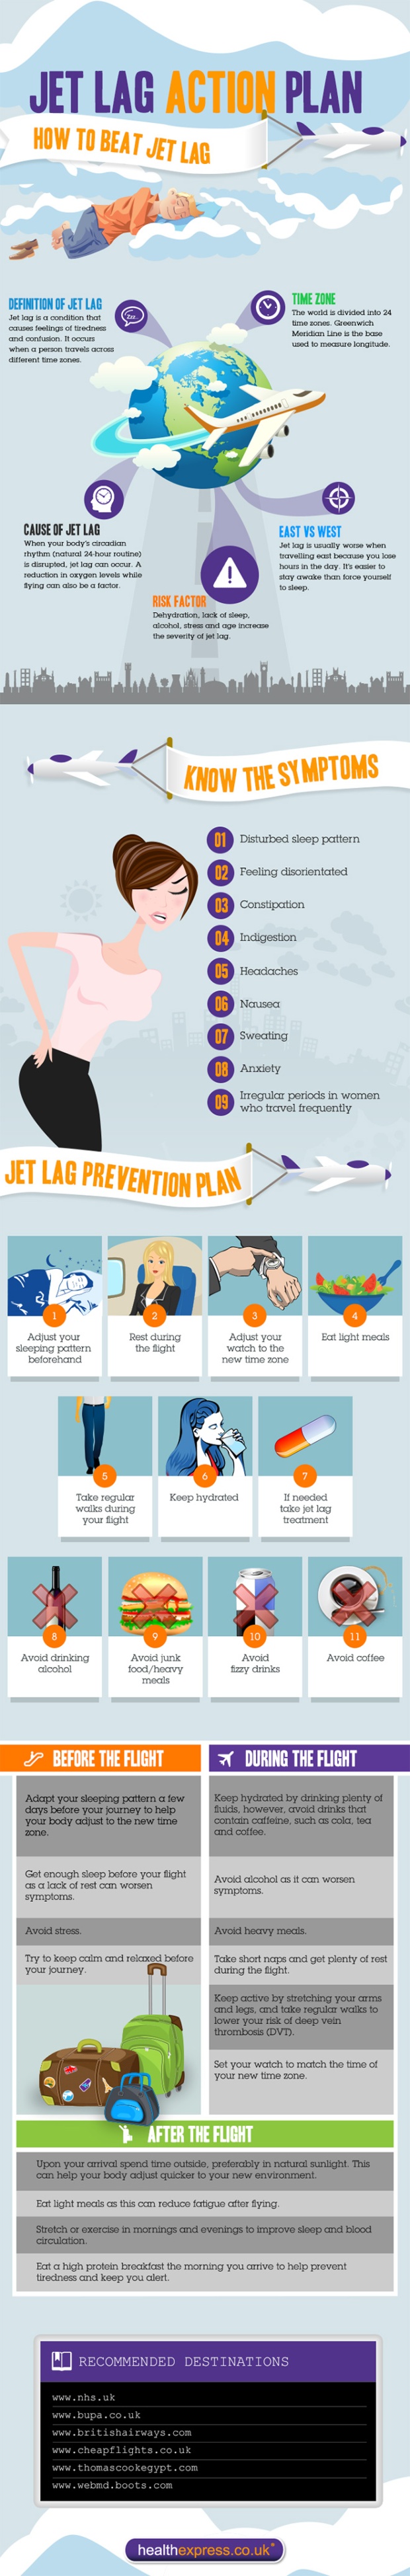 jet-lag-action-plan--how-to-beat-jet-lag_518a6ded93575